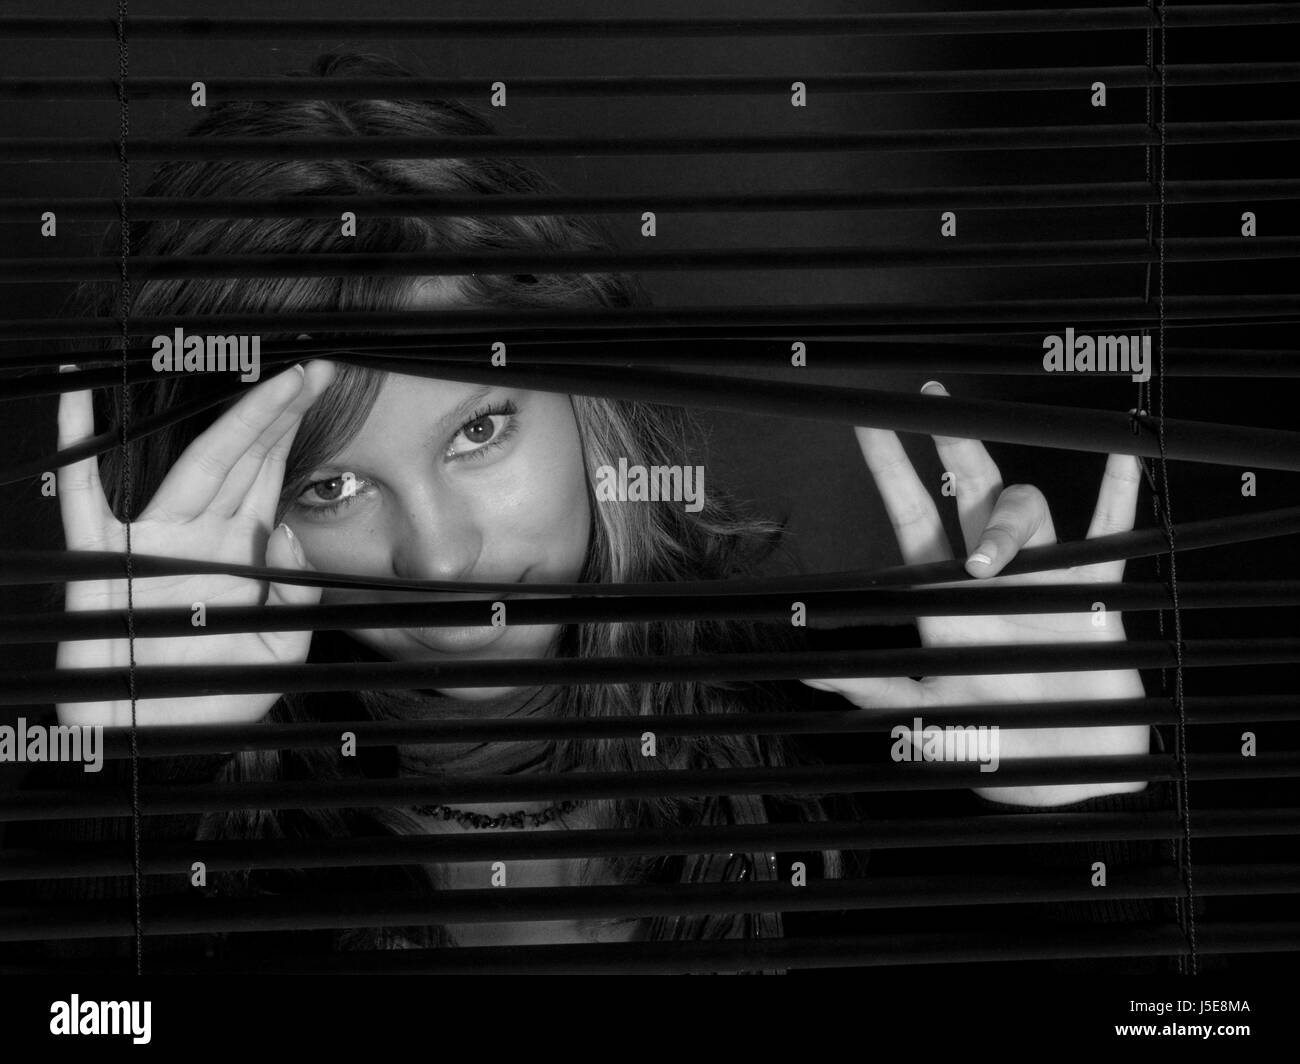 Nosy girl Black and White Stock Photos & Images - Alamy